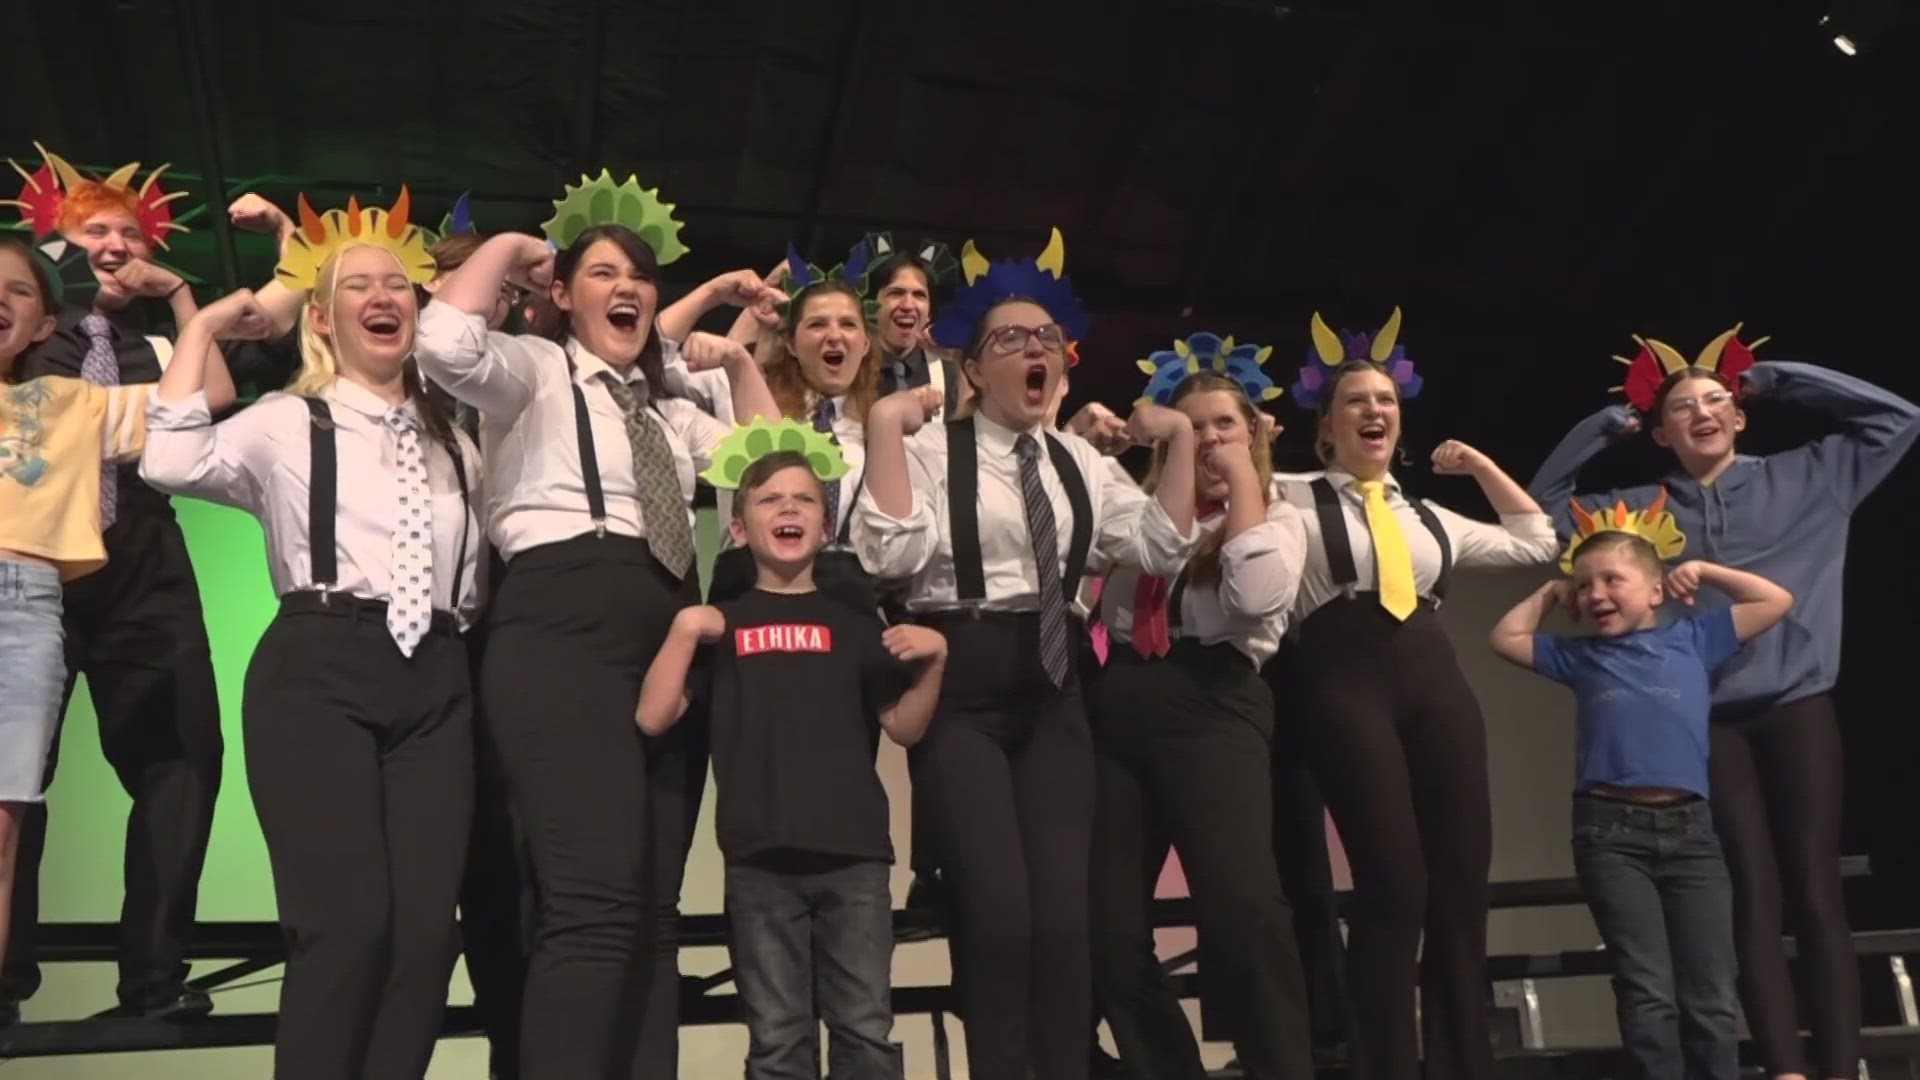 "The Dinosaur Disaster," written by the four Porter siblings, went from words to song and was performed for the family on stage this week.